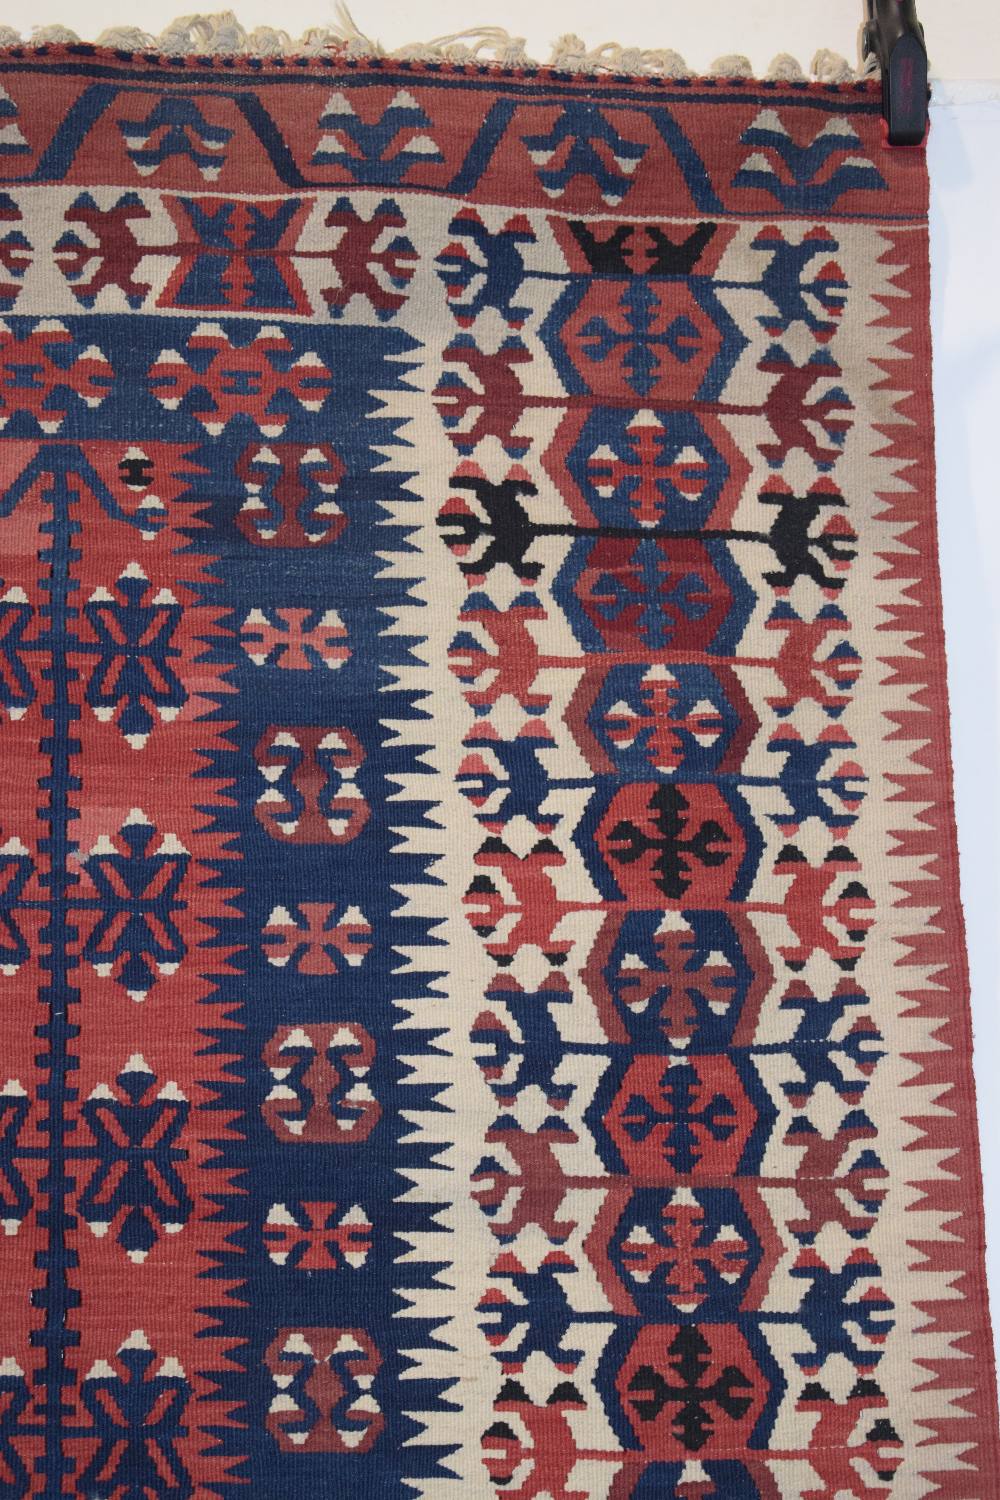 Two Anatolian rugs, the first: Konya kelim, central Anatolia, circa 1940s-50s, 4ft. 11in. X 3ft. - Image 3 of 17